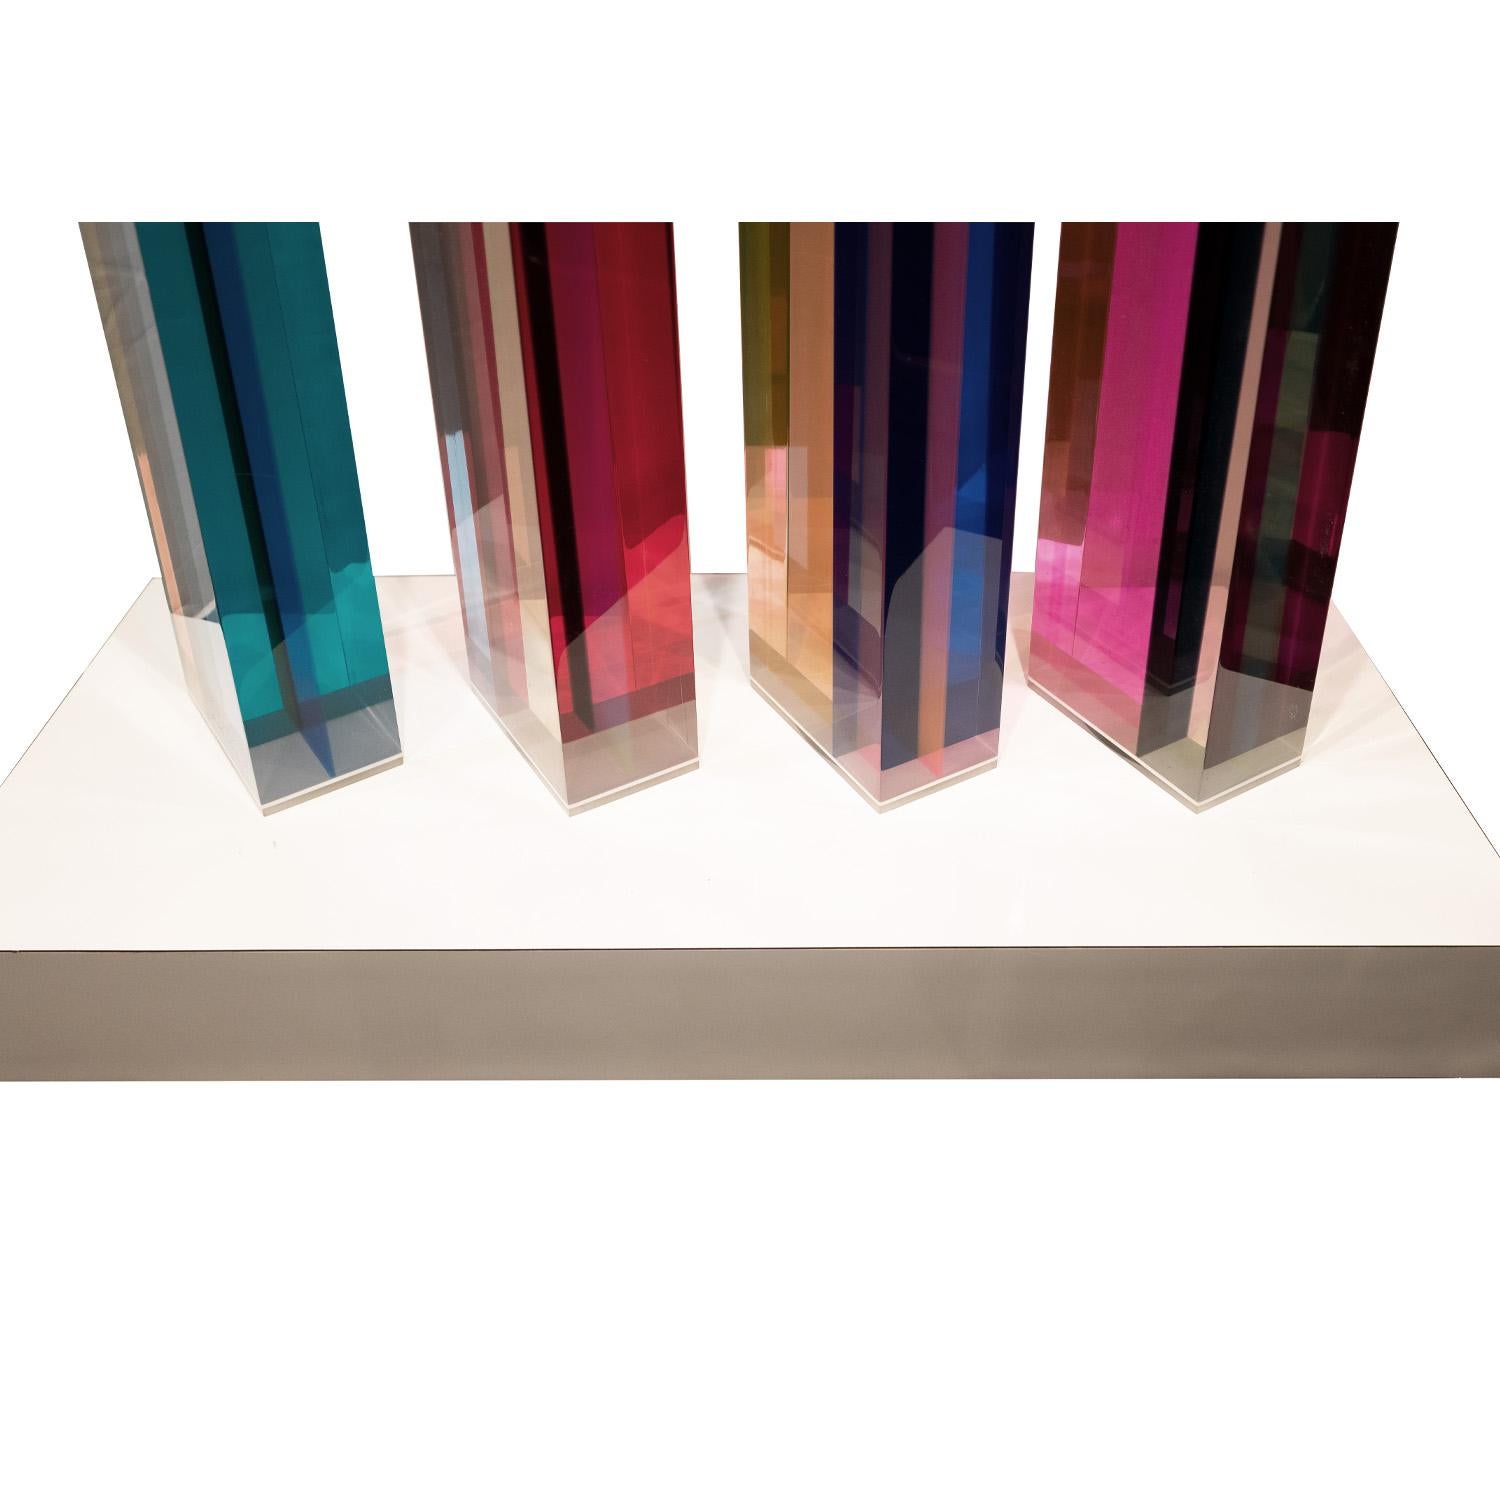 American Vasa Studio Rare Multicolor Lucite 4 Tower Sculpture 1985 'Signed and Dated'